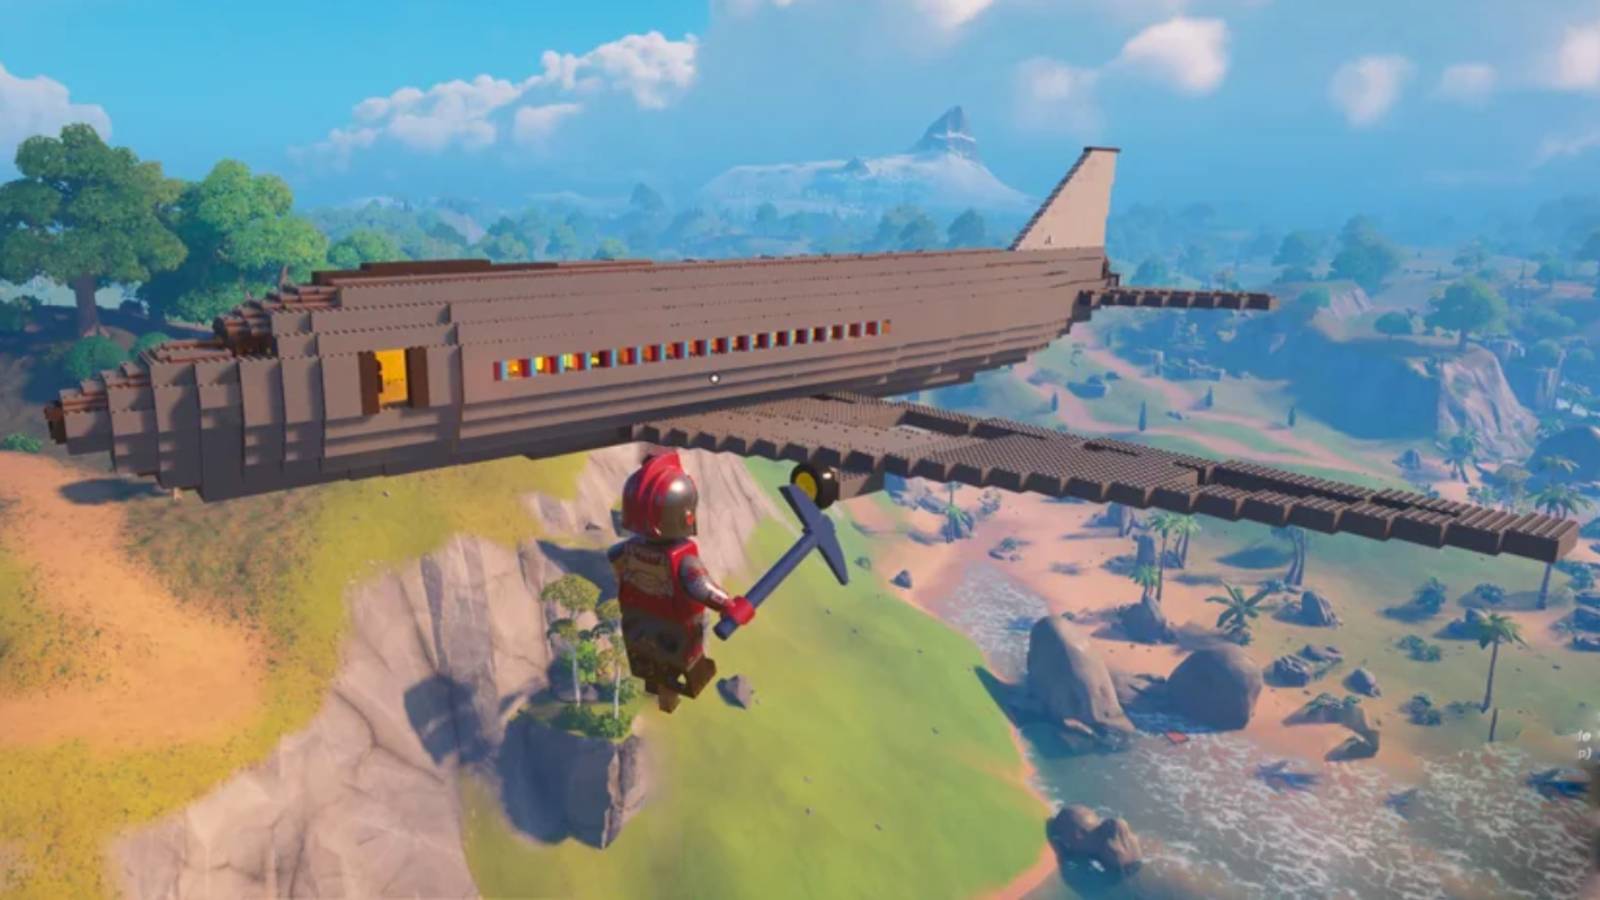 Young LEGO enthusiast takes Fortnite to new heights with ingenious in-game plane creation